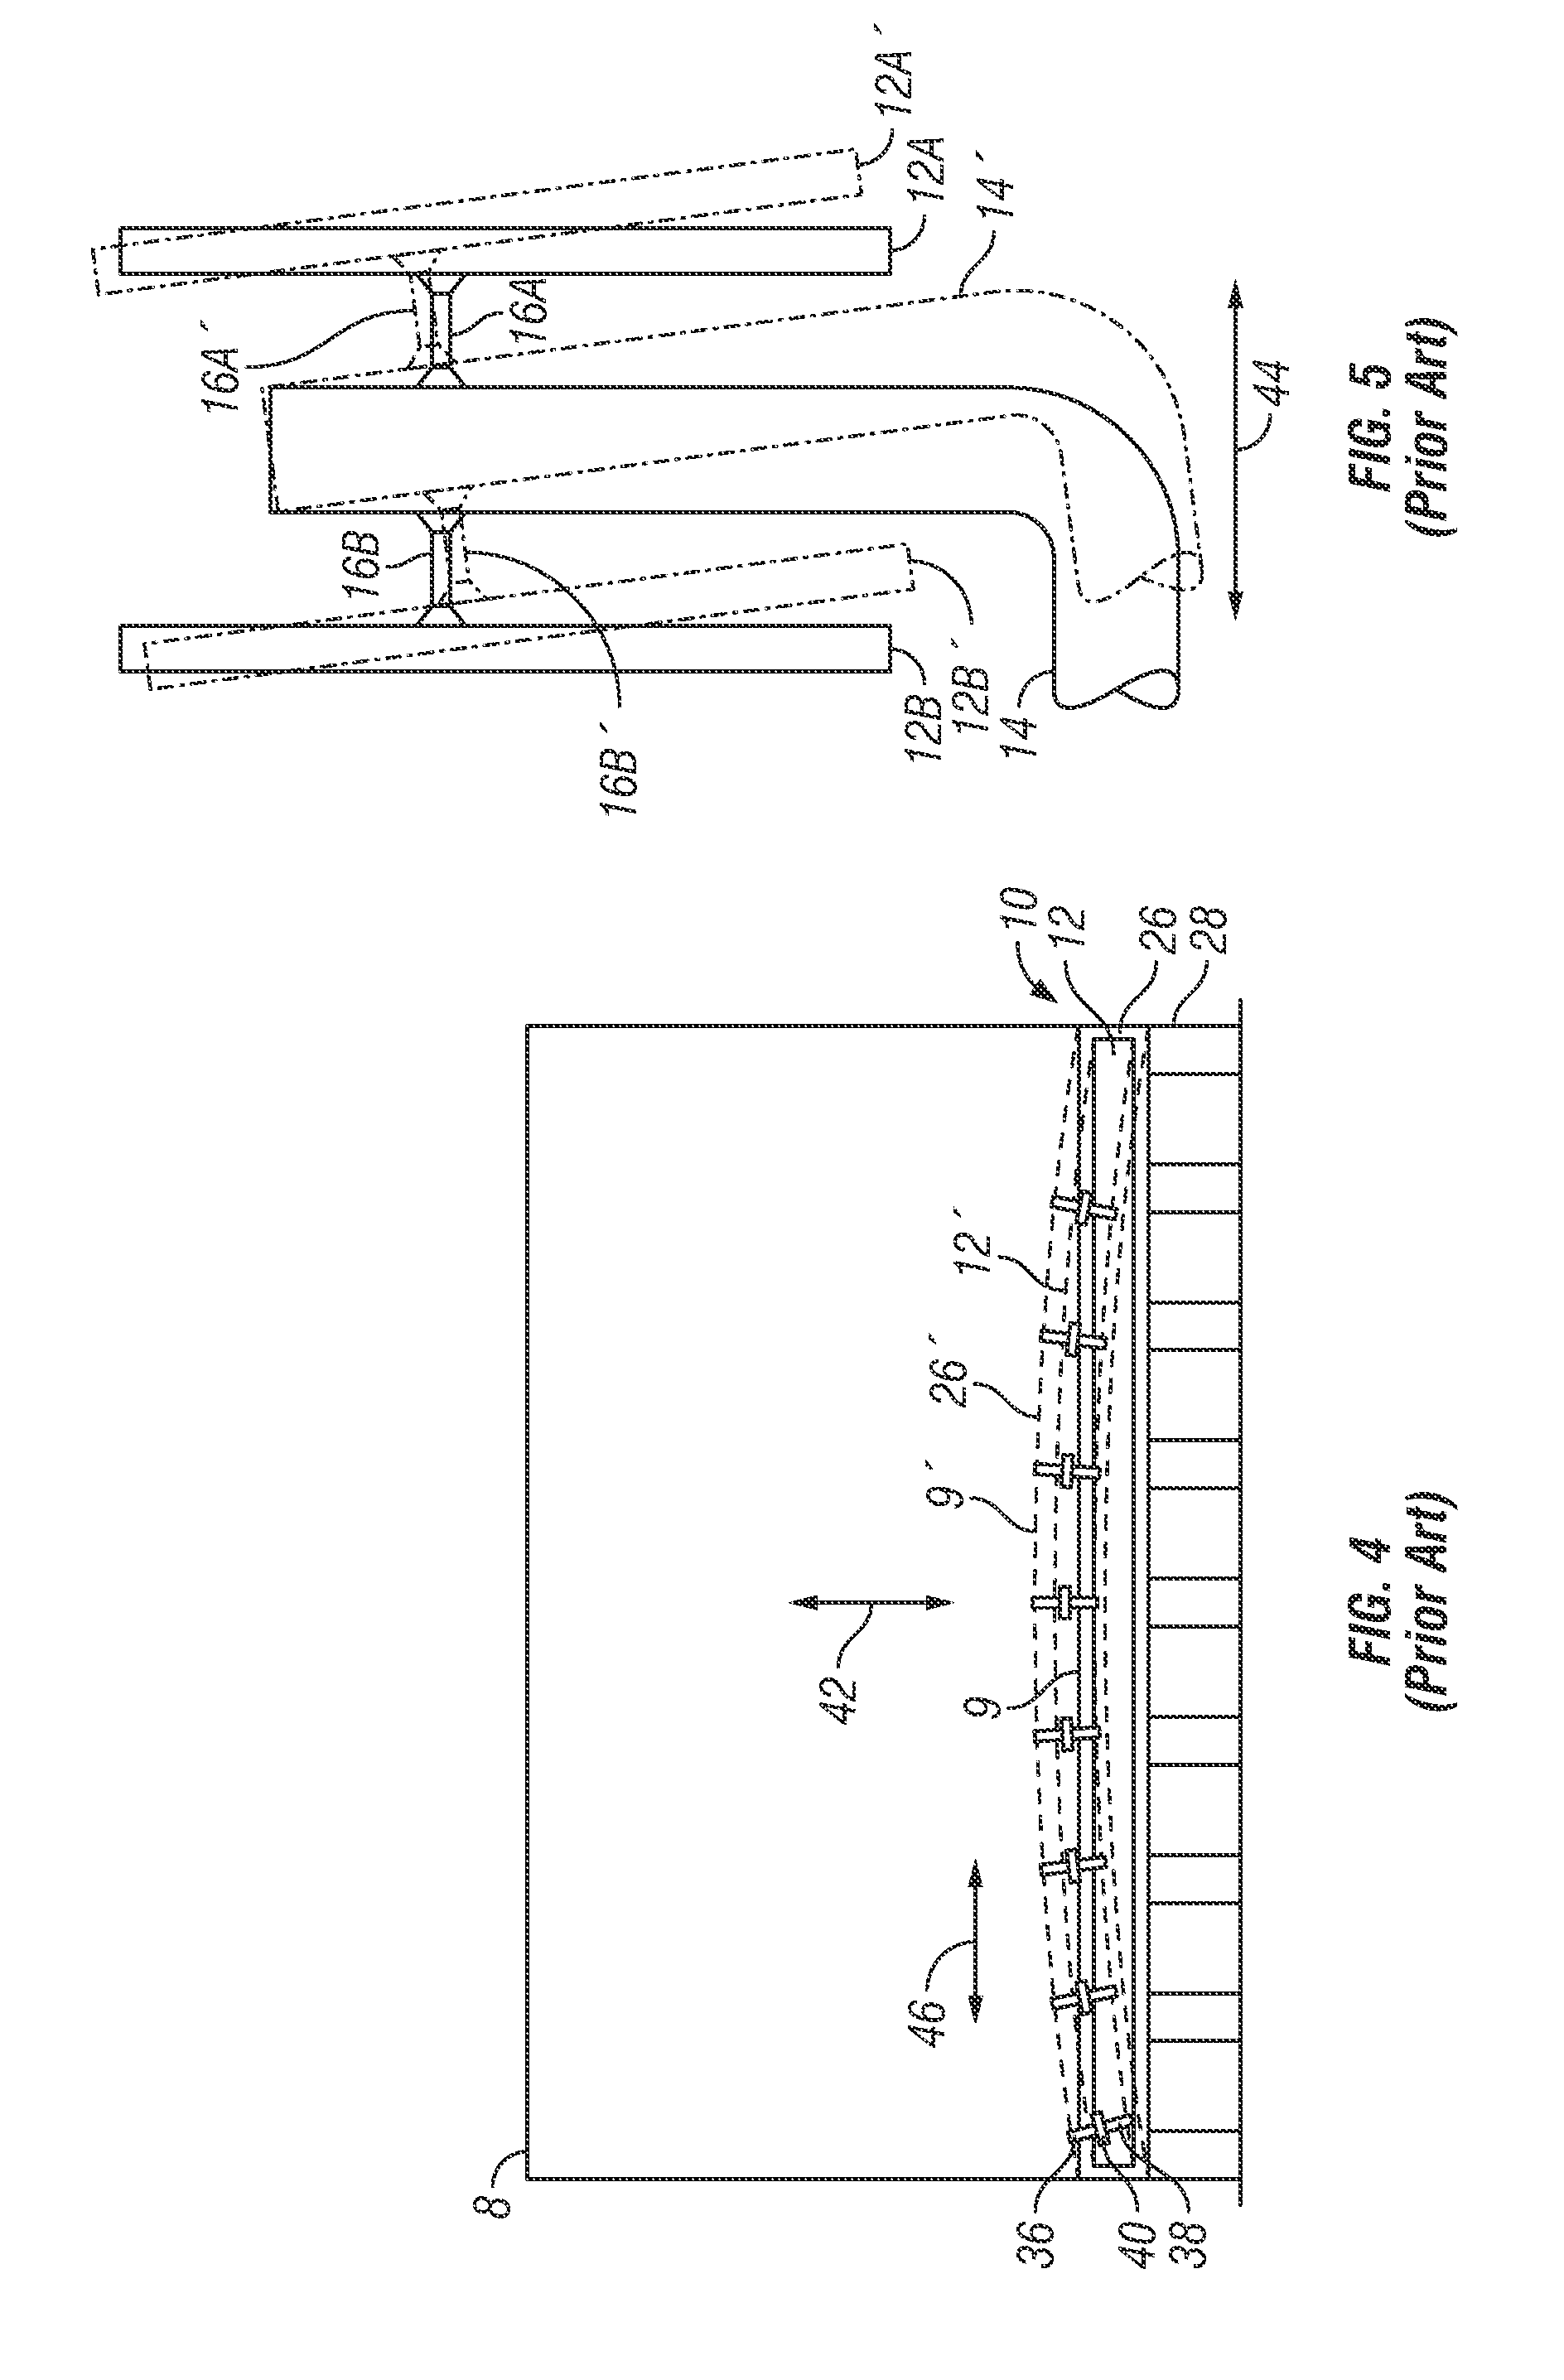 Steam-hydrocarbon reformer improved manifold support and header box system